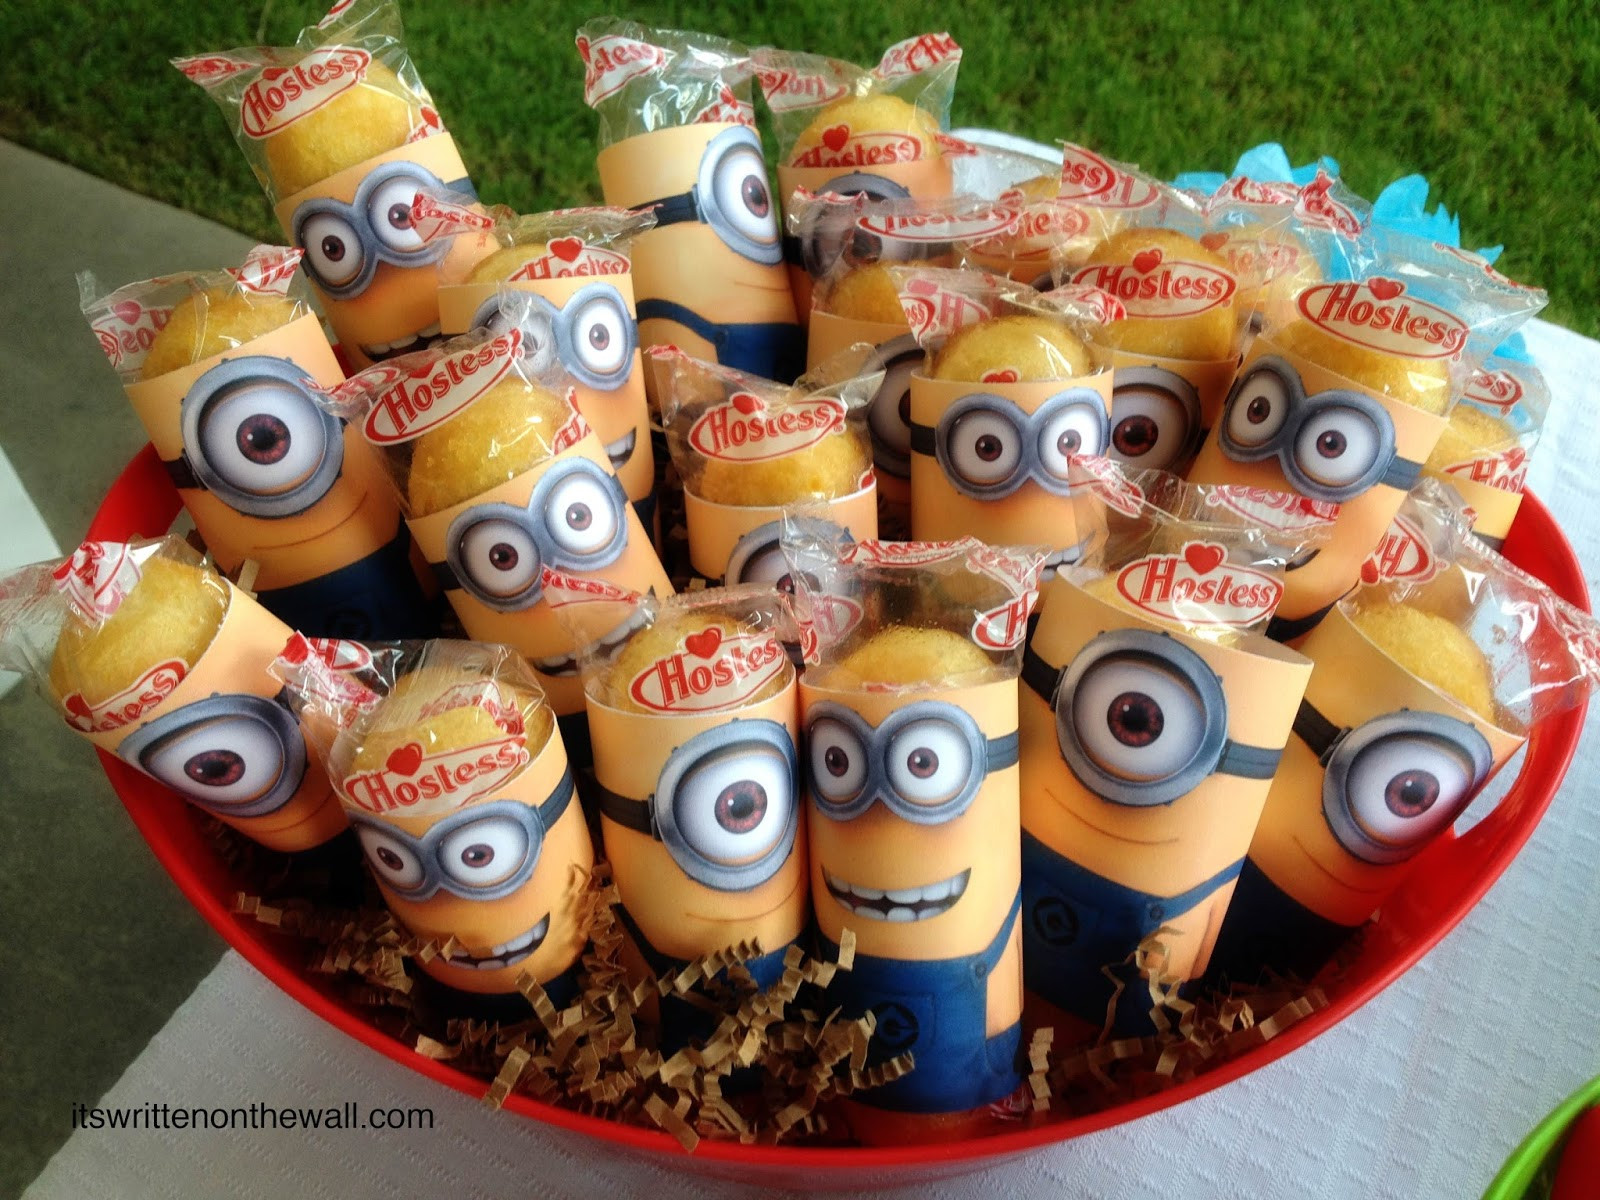 Despicable Me Birthday Party Supplies
 It s Written on the Wall Despicable Me Minions Birthday